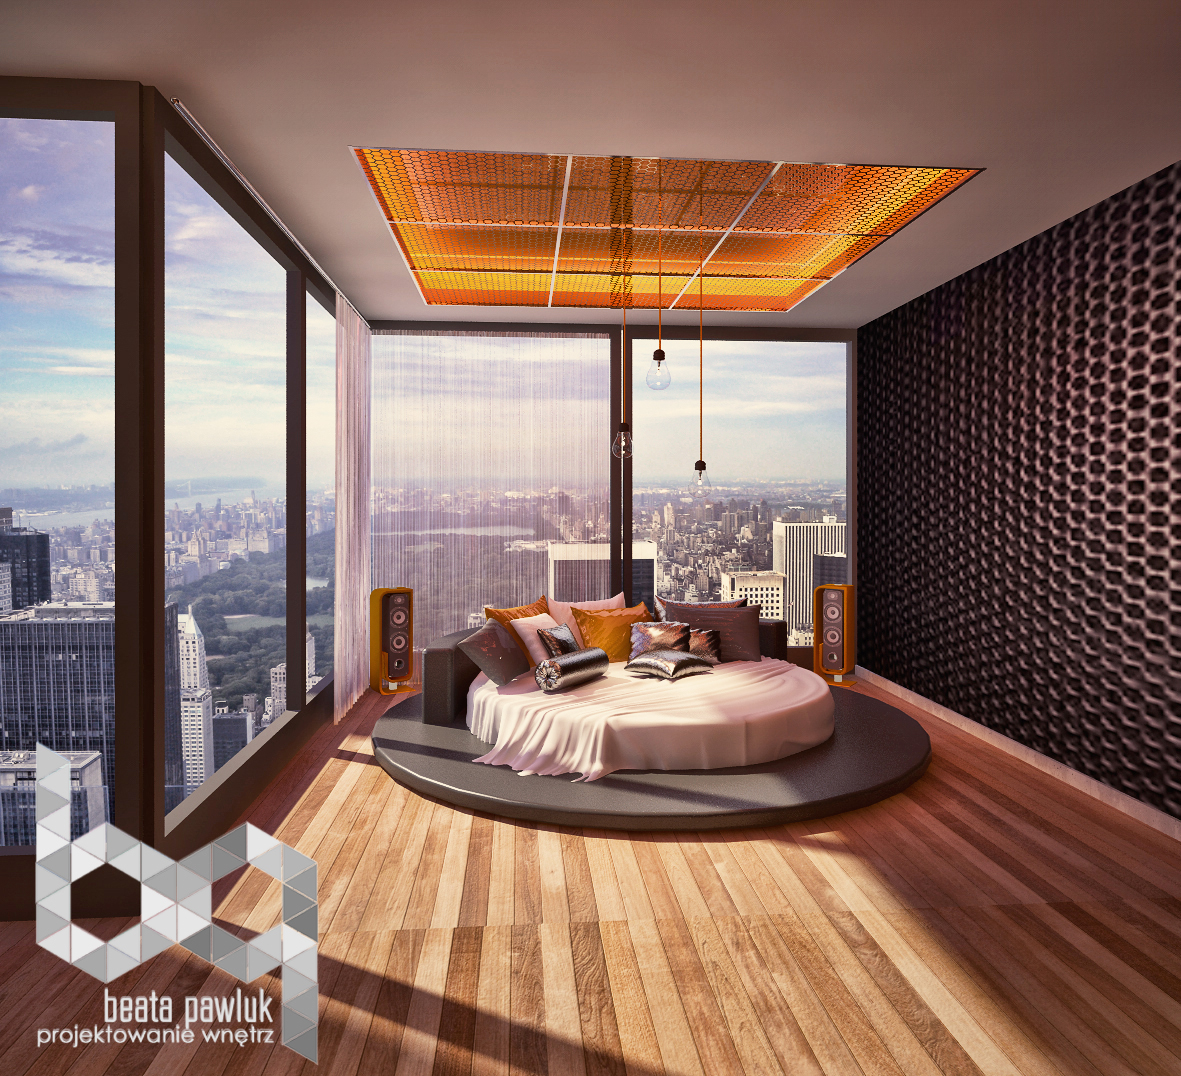 designs bedroom ideas for teenagers "width =" 1181 "height =" 1076 "srcset =" https://mileray.com/wp-content/uploads/2020/05/1588510602_577_7-Teenage-Bedroom-Design-Ideas-Which-Is-Cool-and-Unique.png 1181w, https: // myfashionos. com / wp-content / uploads / 2016/06 / Beata-Pawluk-300x273.png 300w, https://mileray.com/wp-content/uploads/2016/06/Beata-Pawluk-768x700.png 768w, https: //mileray.com/wp-content/uploads/2016/06/Beata-Pawluk-1024x933.png 1024w, https://mileray.com/wp-content/uploads/2016/06/Beata-Pawluk-696x634.png 696w, https://mileray.com/wp-content/uploads/2016/06/Beata-Pawluk-1068x973.png 1068w, https://mileray.com/wp-content/uploads/2016/06/Beata-Pawluk -461x420.png 461w "sizes =" (maximum width: 1181px) 100vw, 1181px